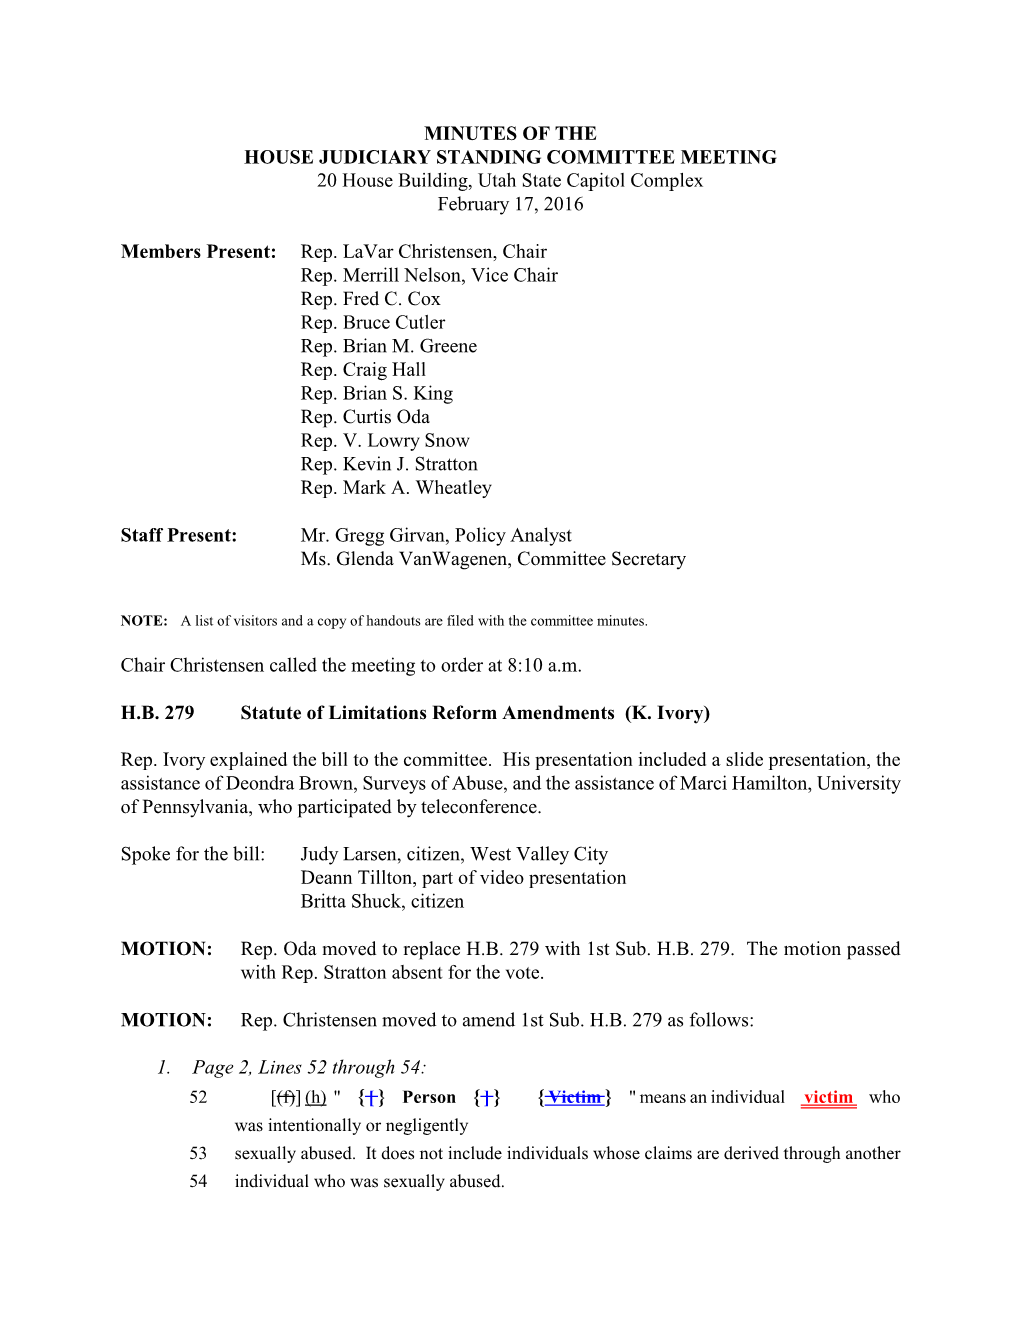 Minutes for House Judiciary Committee 02/17